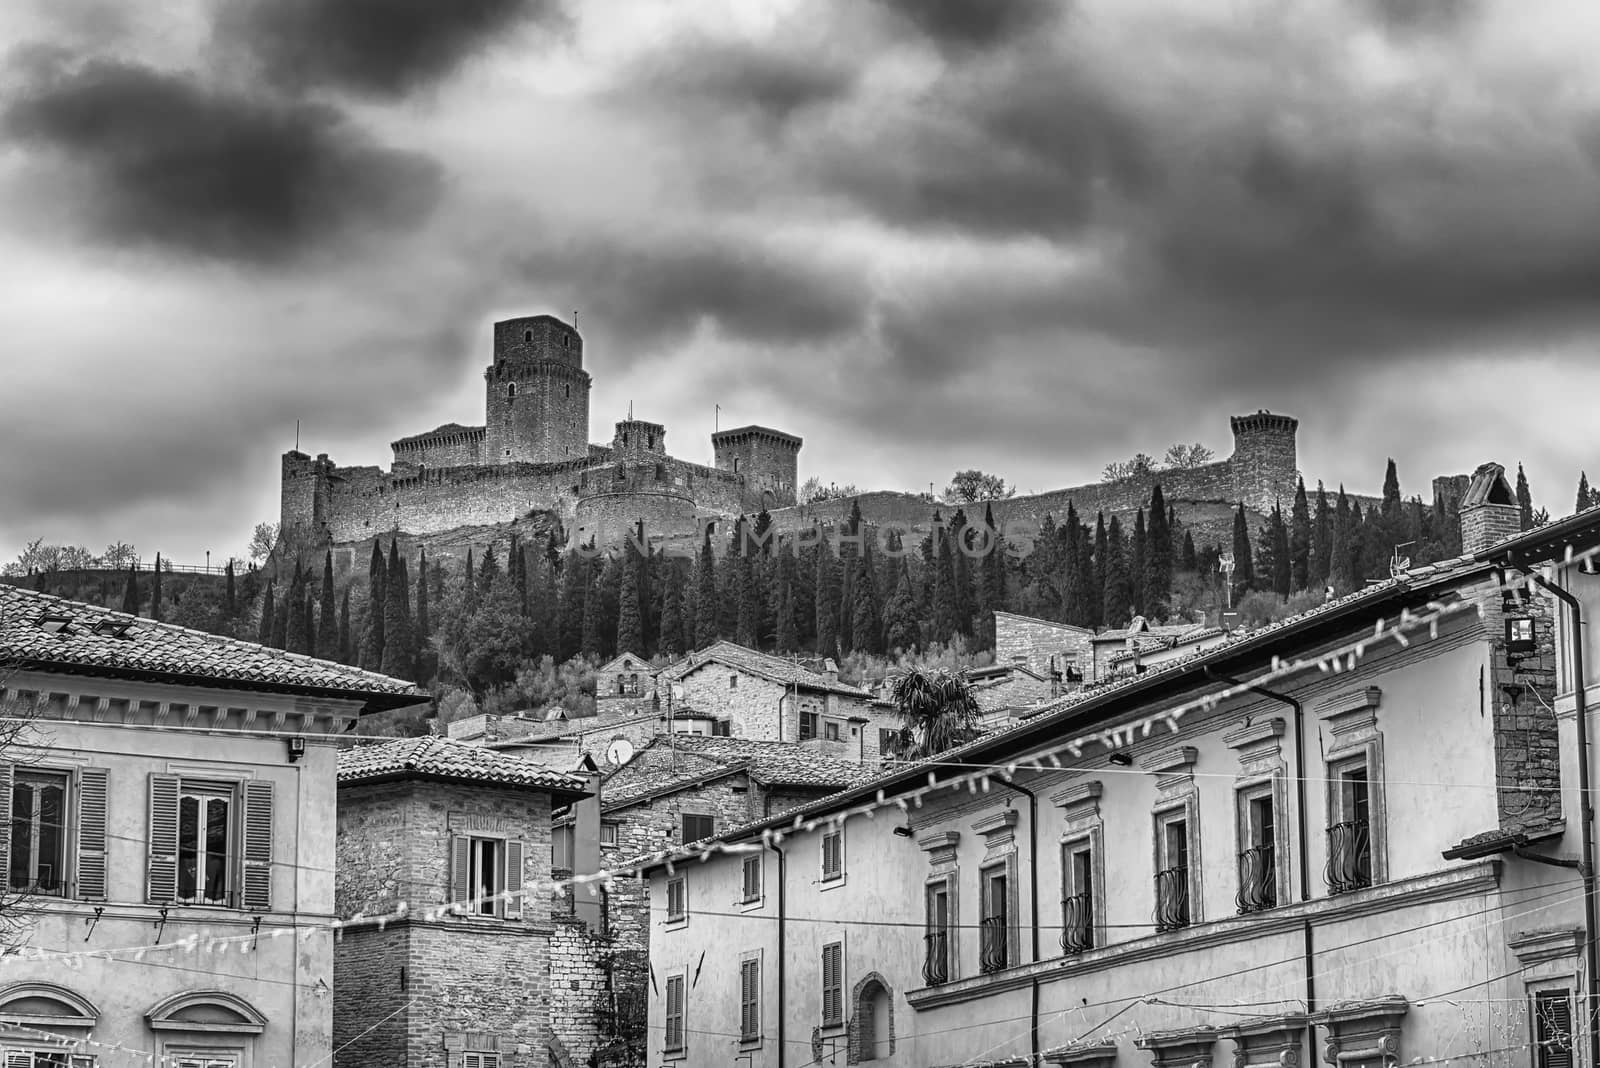 View of Rocca Maggiore, medieval fortress in Assisi, Italy by marcorubino